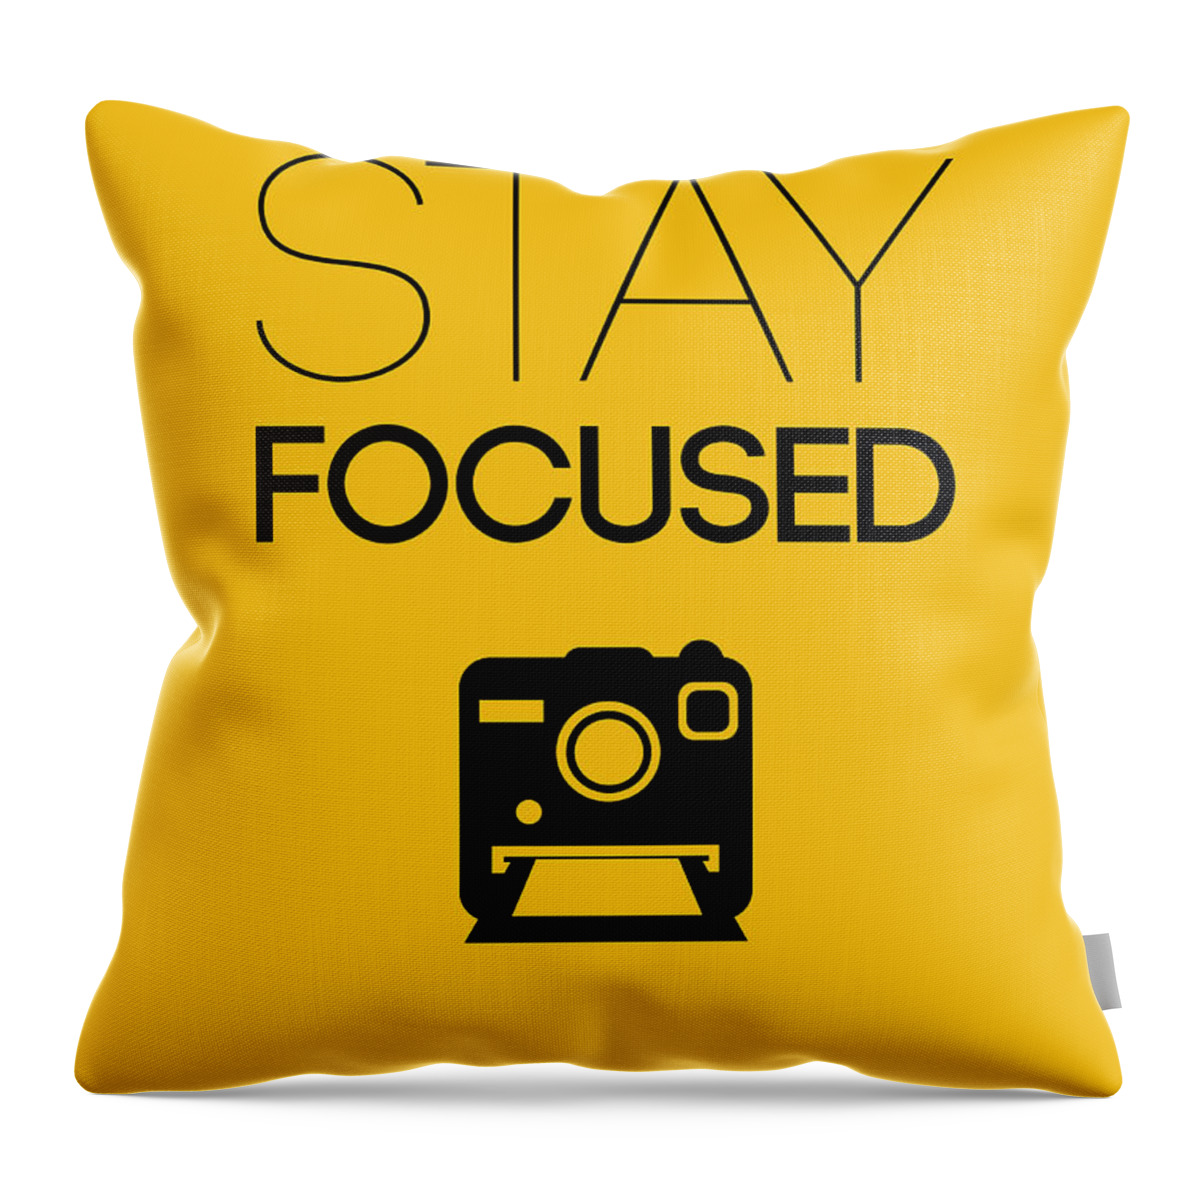 Camera Throw Pillow featuring the digital art Stay Focused Poster 2 by Naxart Studio